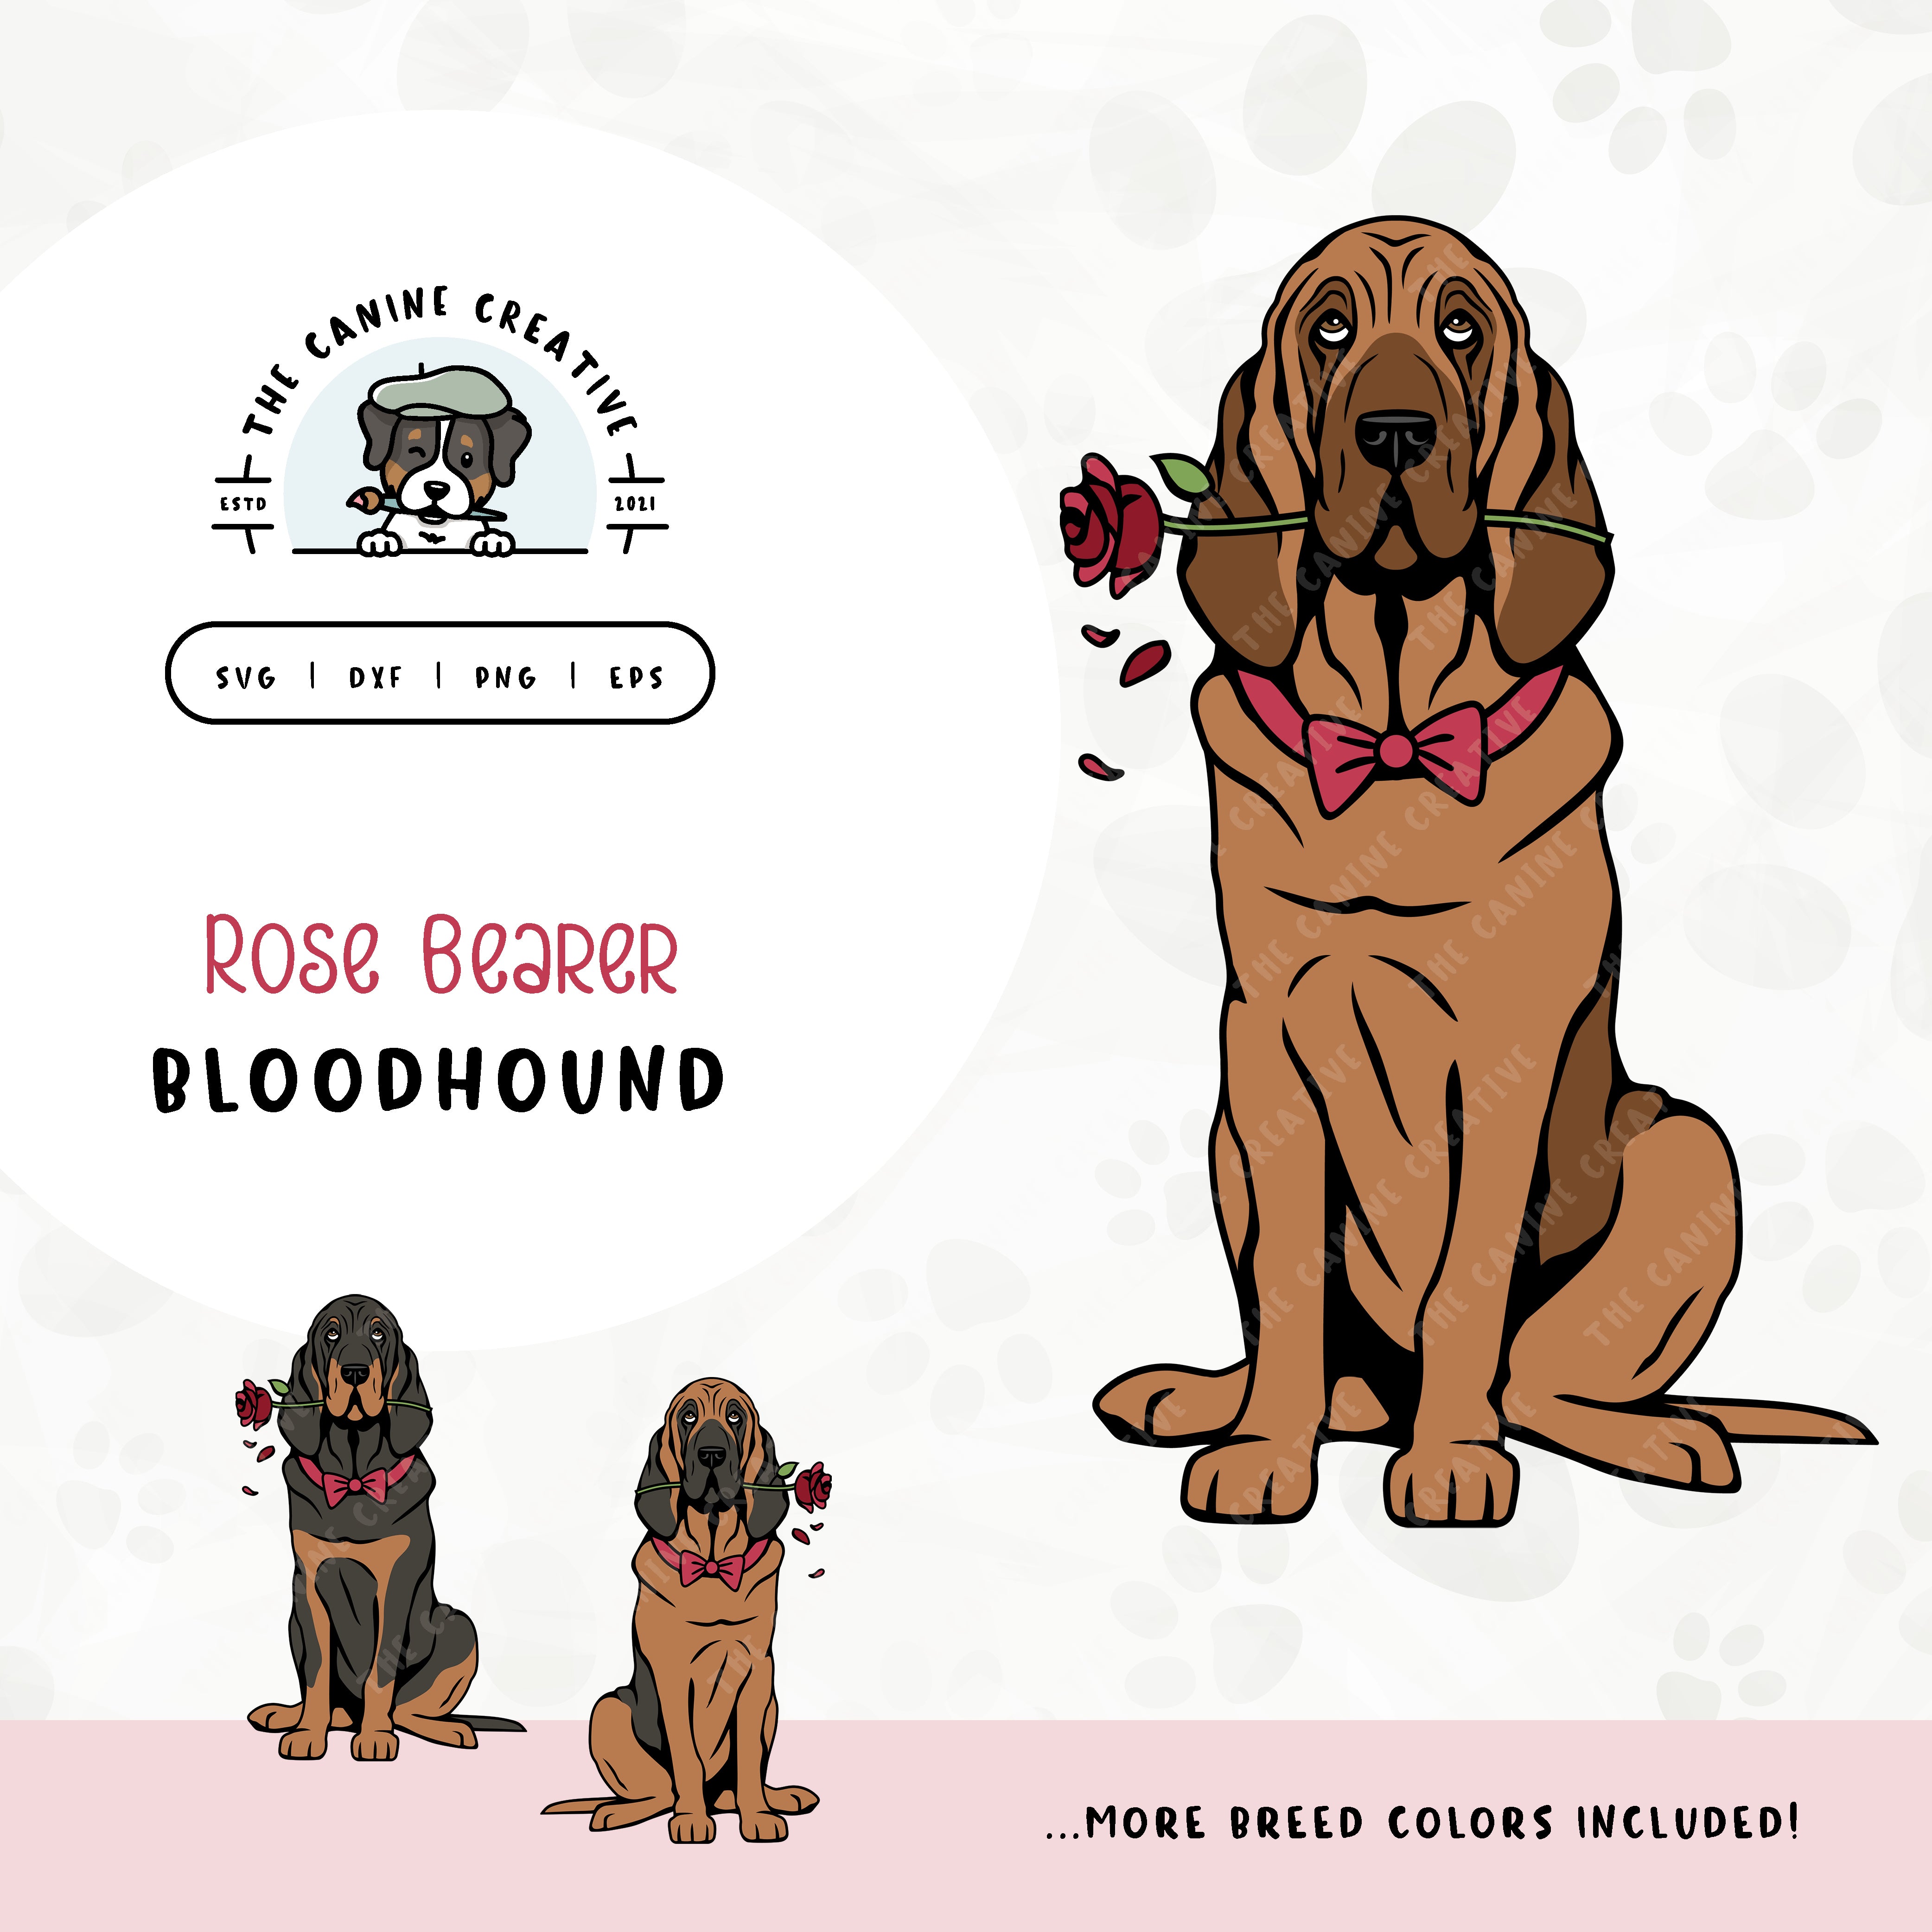 This charming illustration of a Bloodhound features a dapper dog adorned with a bow-tie and holding a rose. File formats include: SVG, DXF, PNG, and EPS.